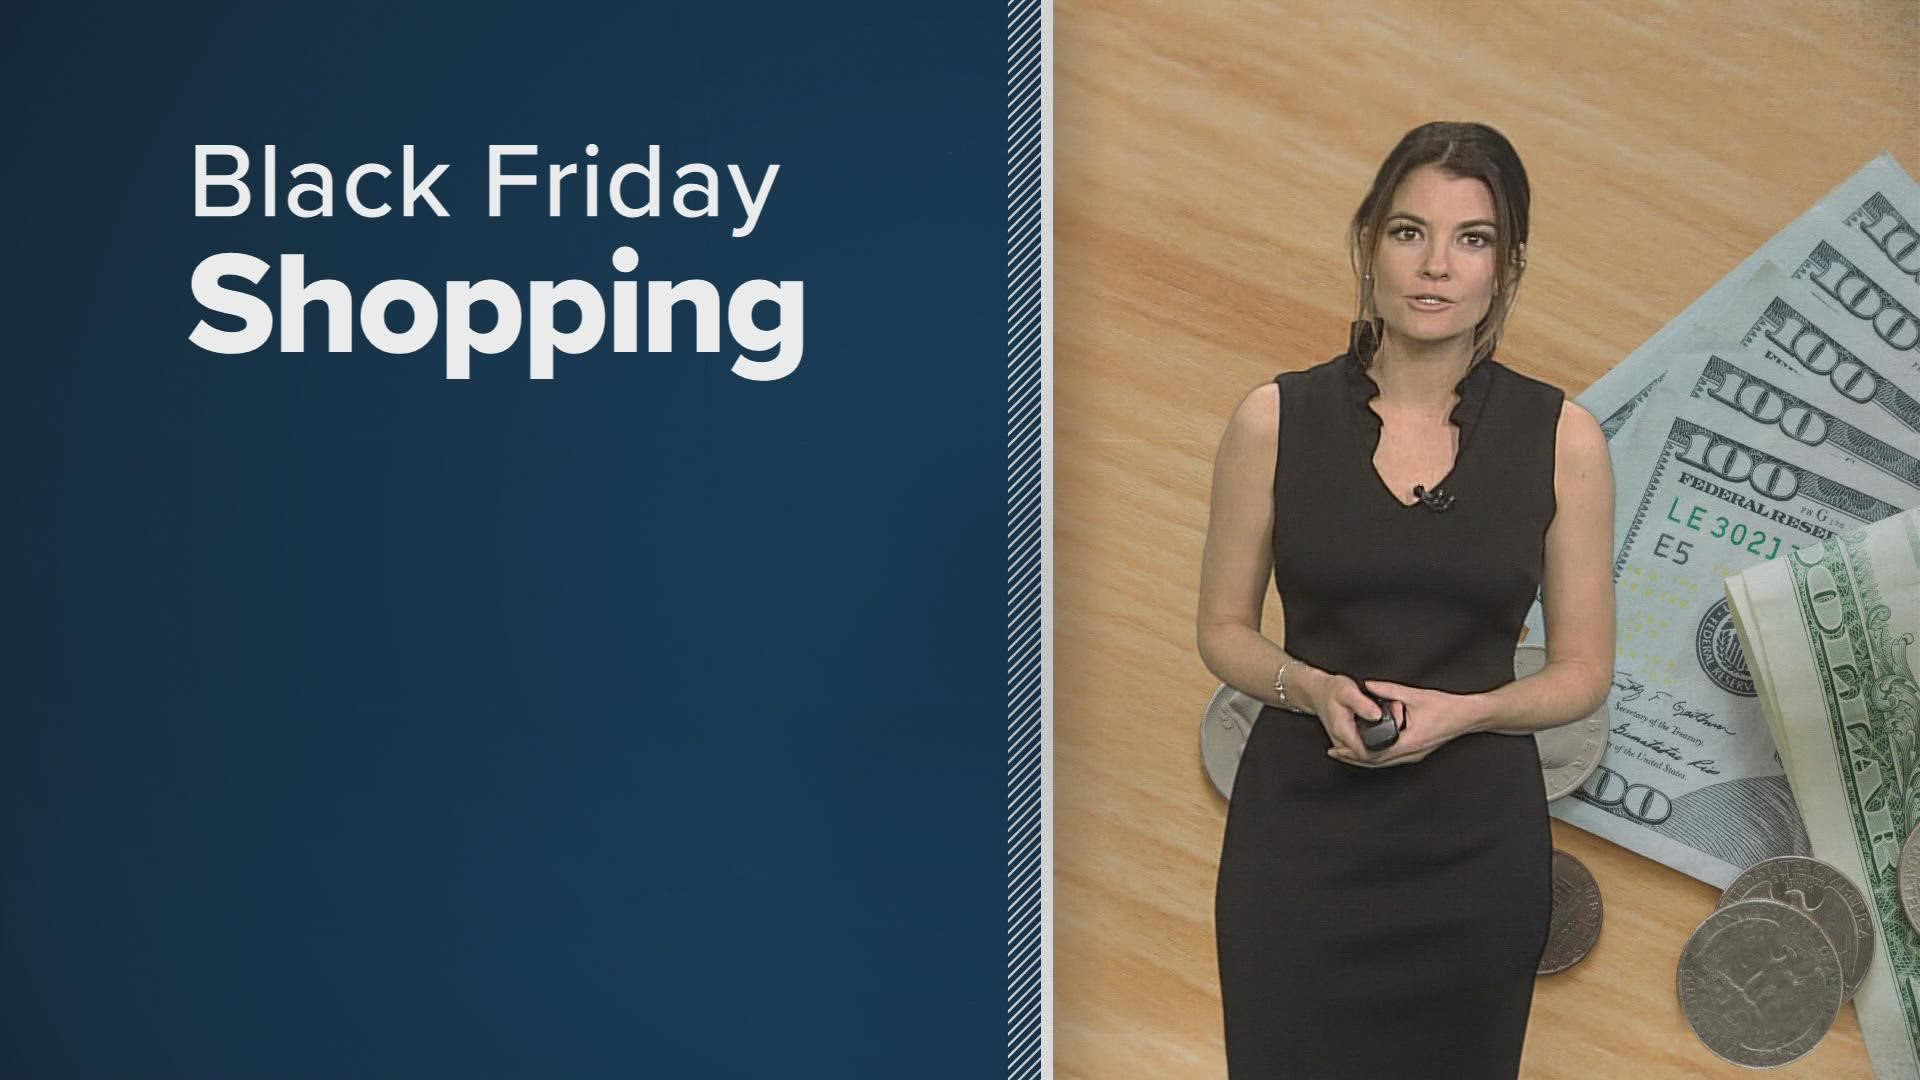 There's easy ways to track price history for holiday shopping deals.